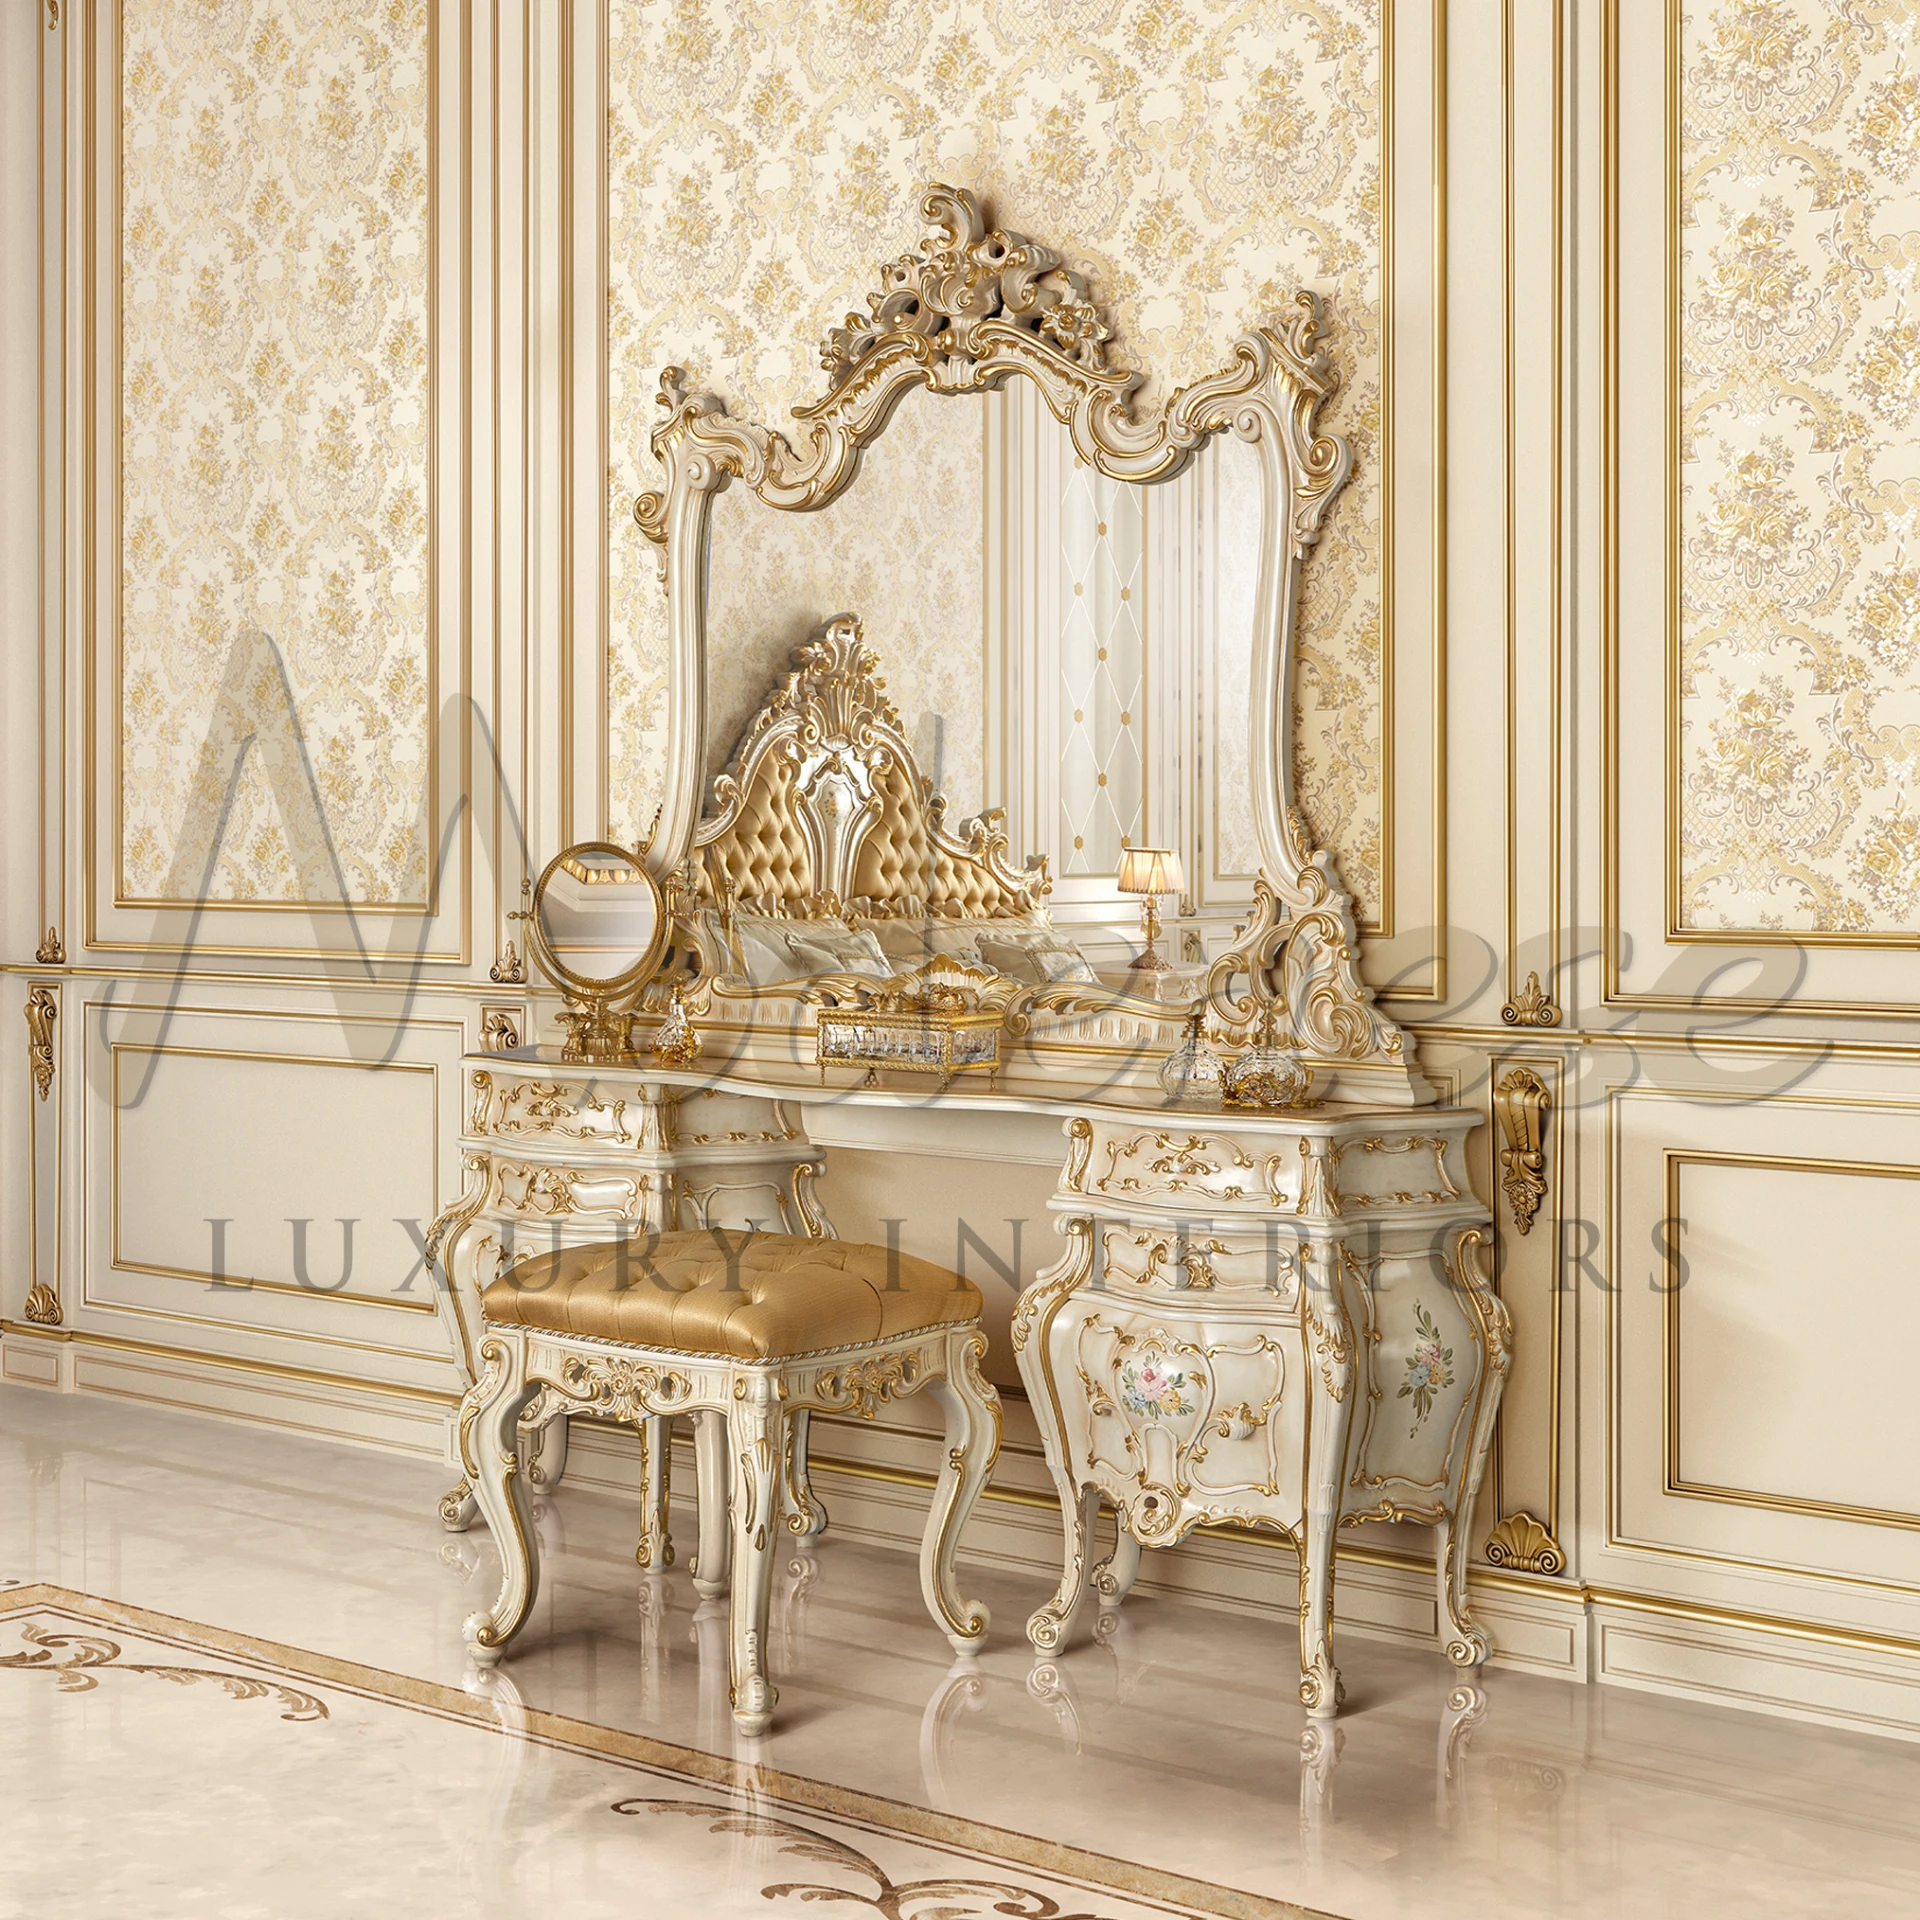 Discover your daily routine with our Baroque Design Toilette, a masterpiece of opulence and practicality in one exquisite package.